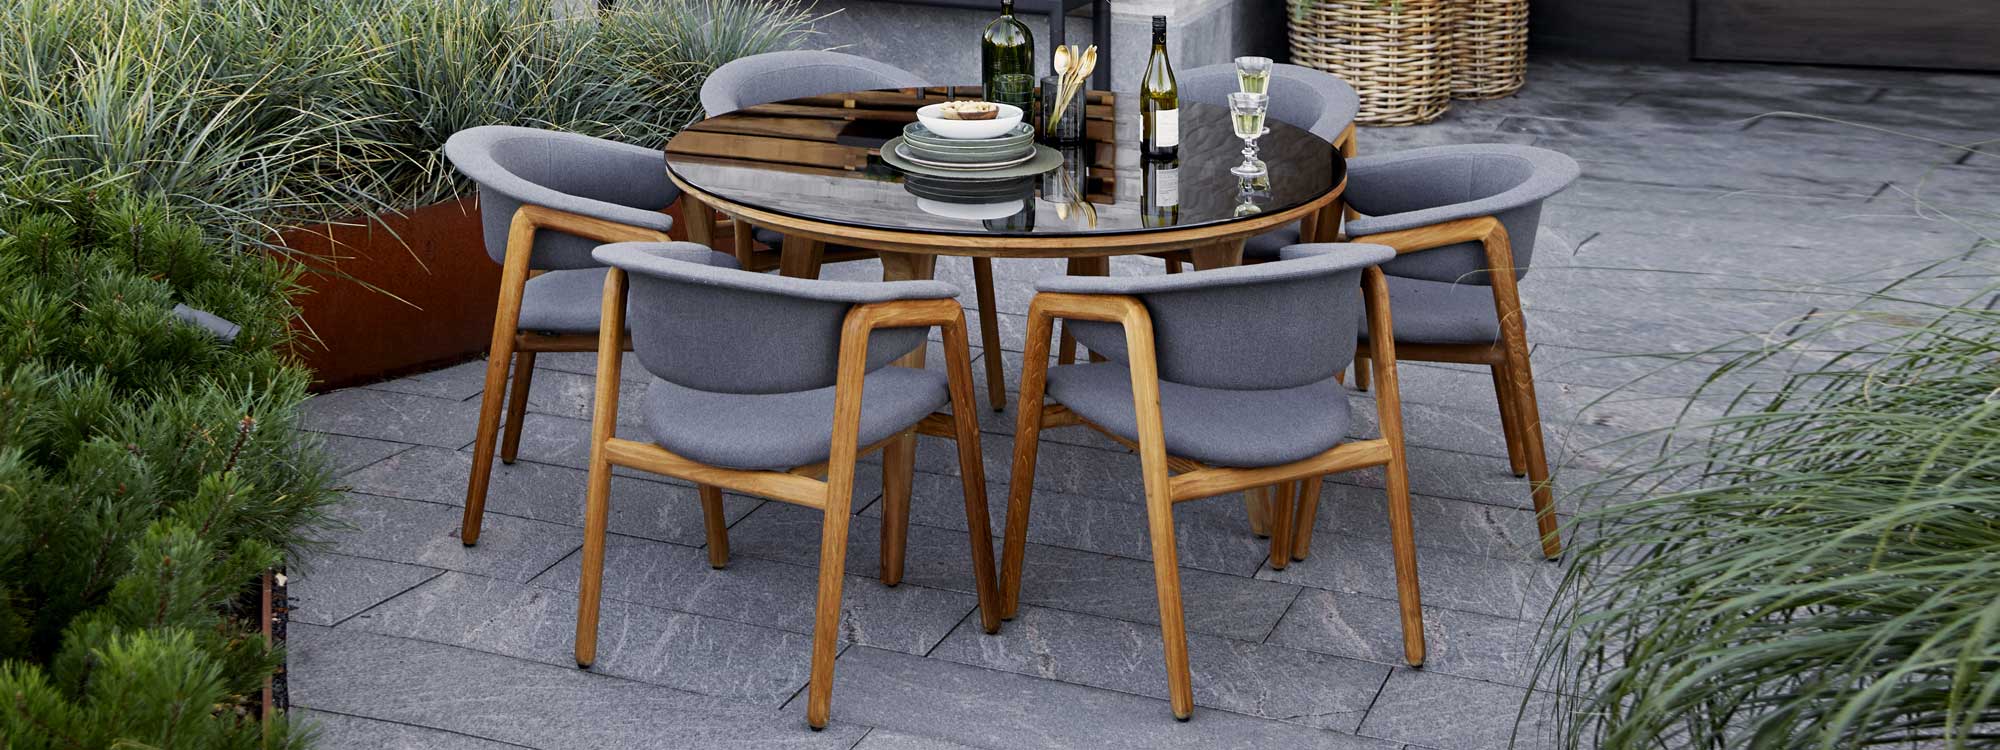 Image of 6 Caneline Luna garden chairs around Aspect circular teak table with Smokey Black toughened glass table top